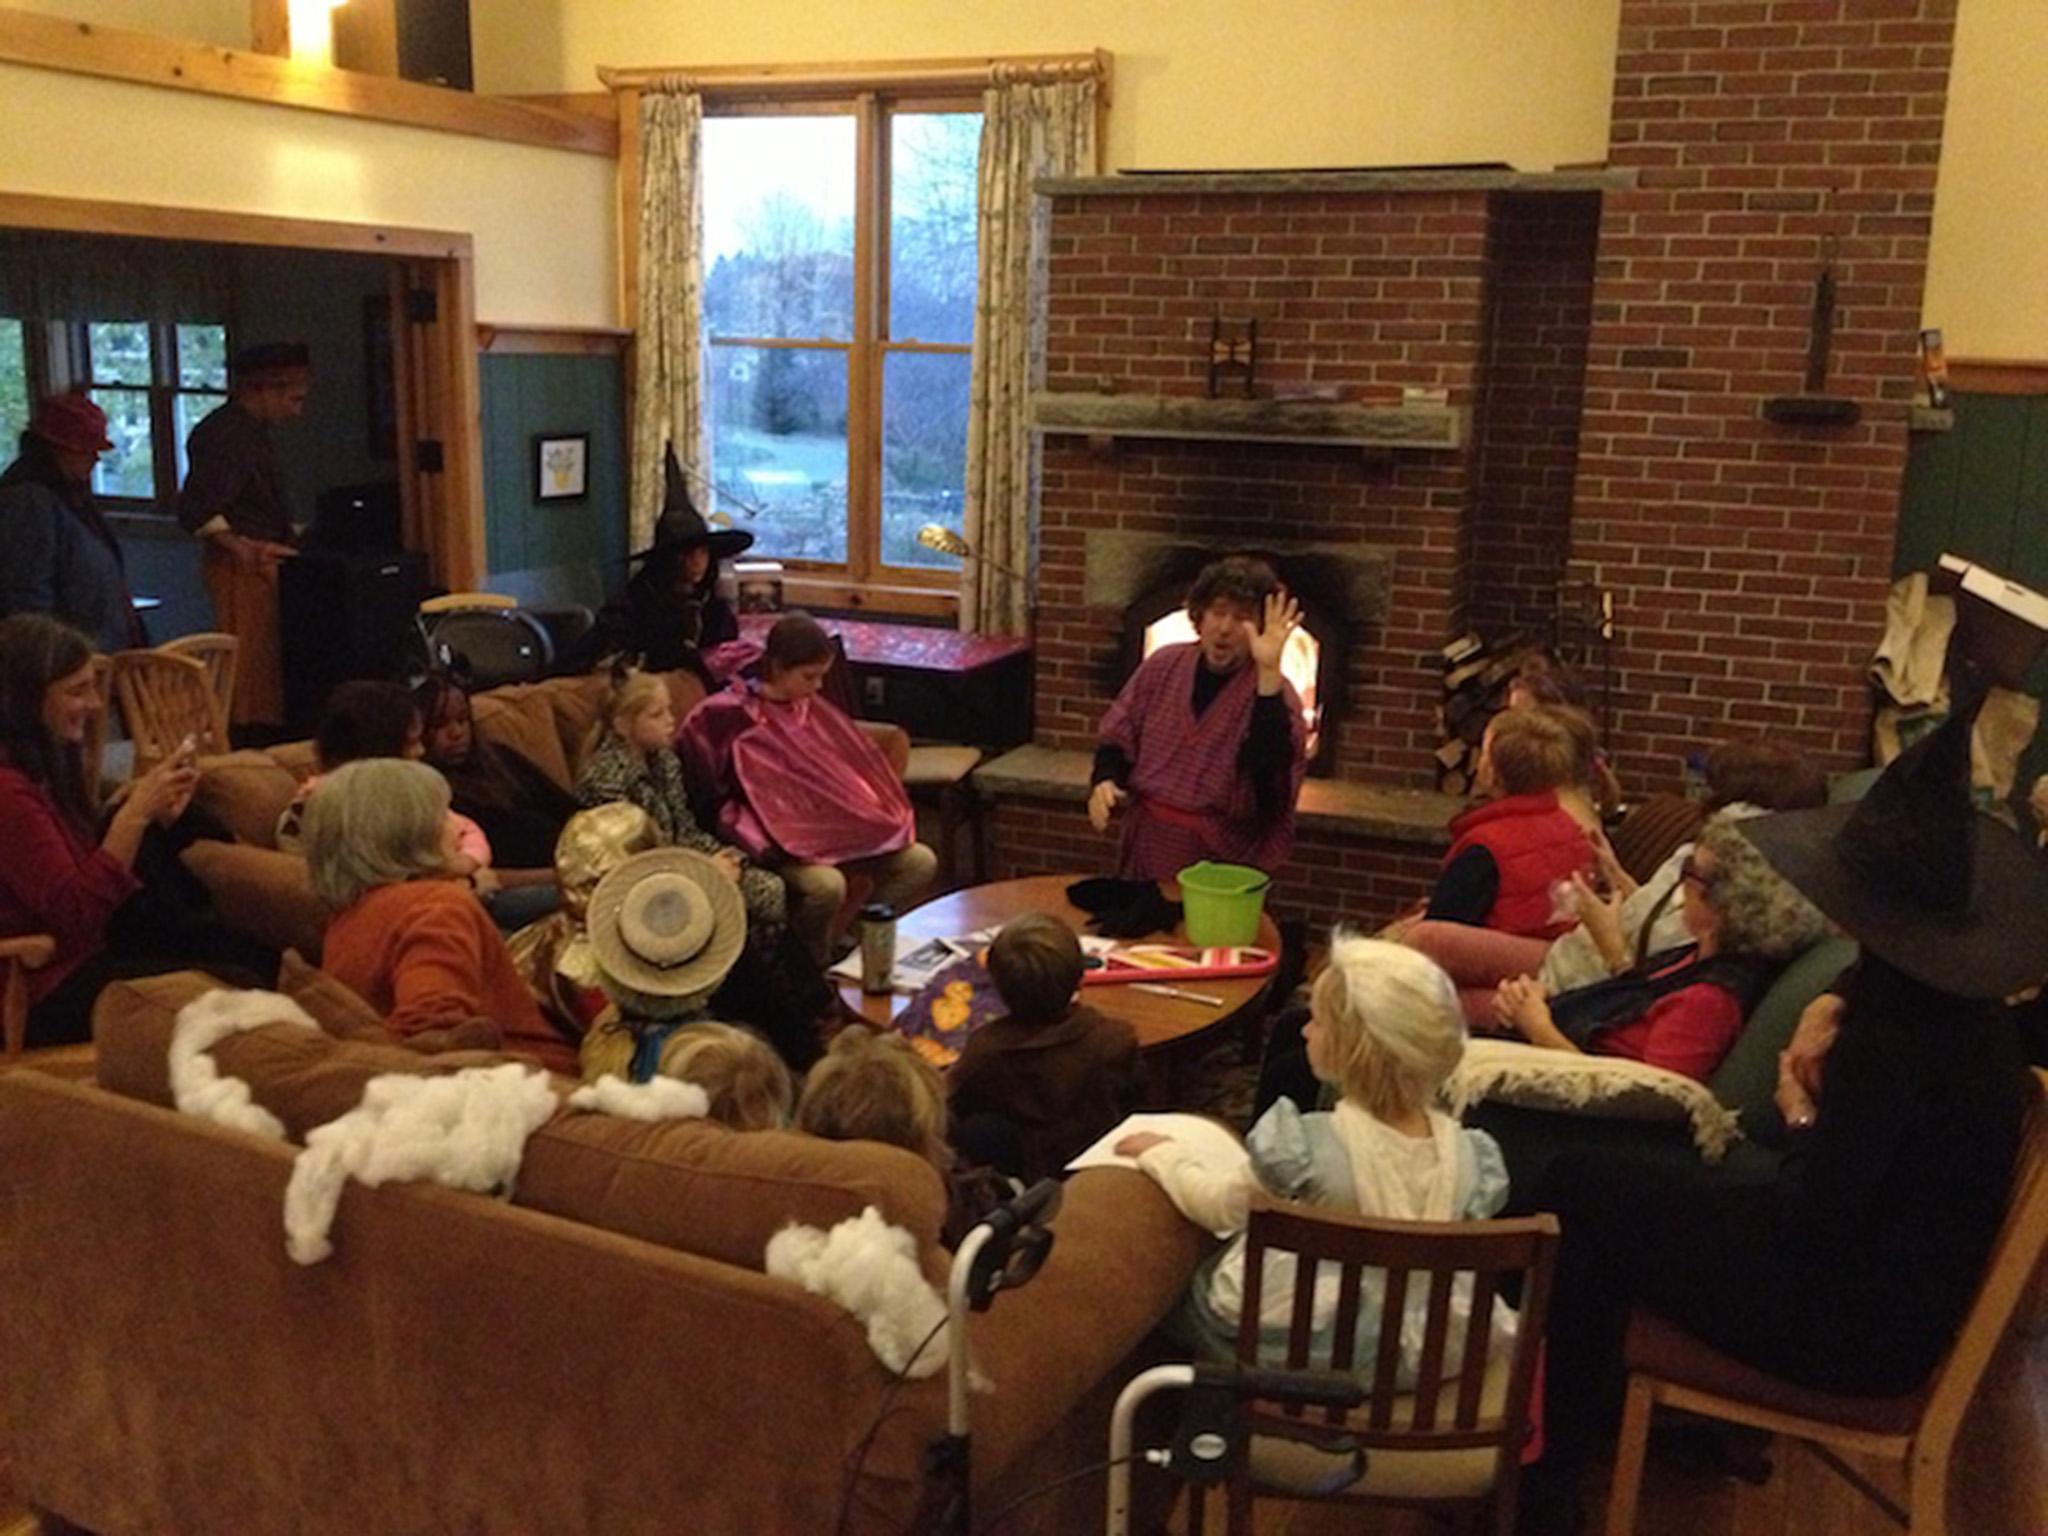 &#13;
Shared space: residents of Amherst community gather in their common house (John Fabel, Pioneer Valley Cohousing)&#13;